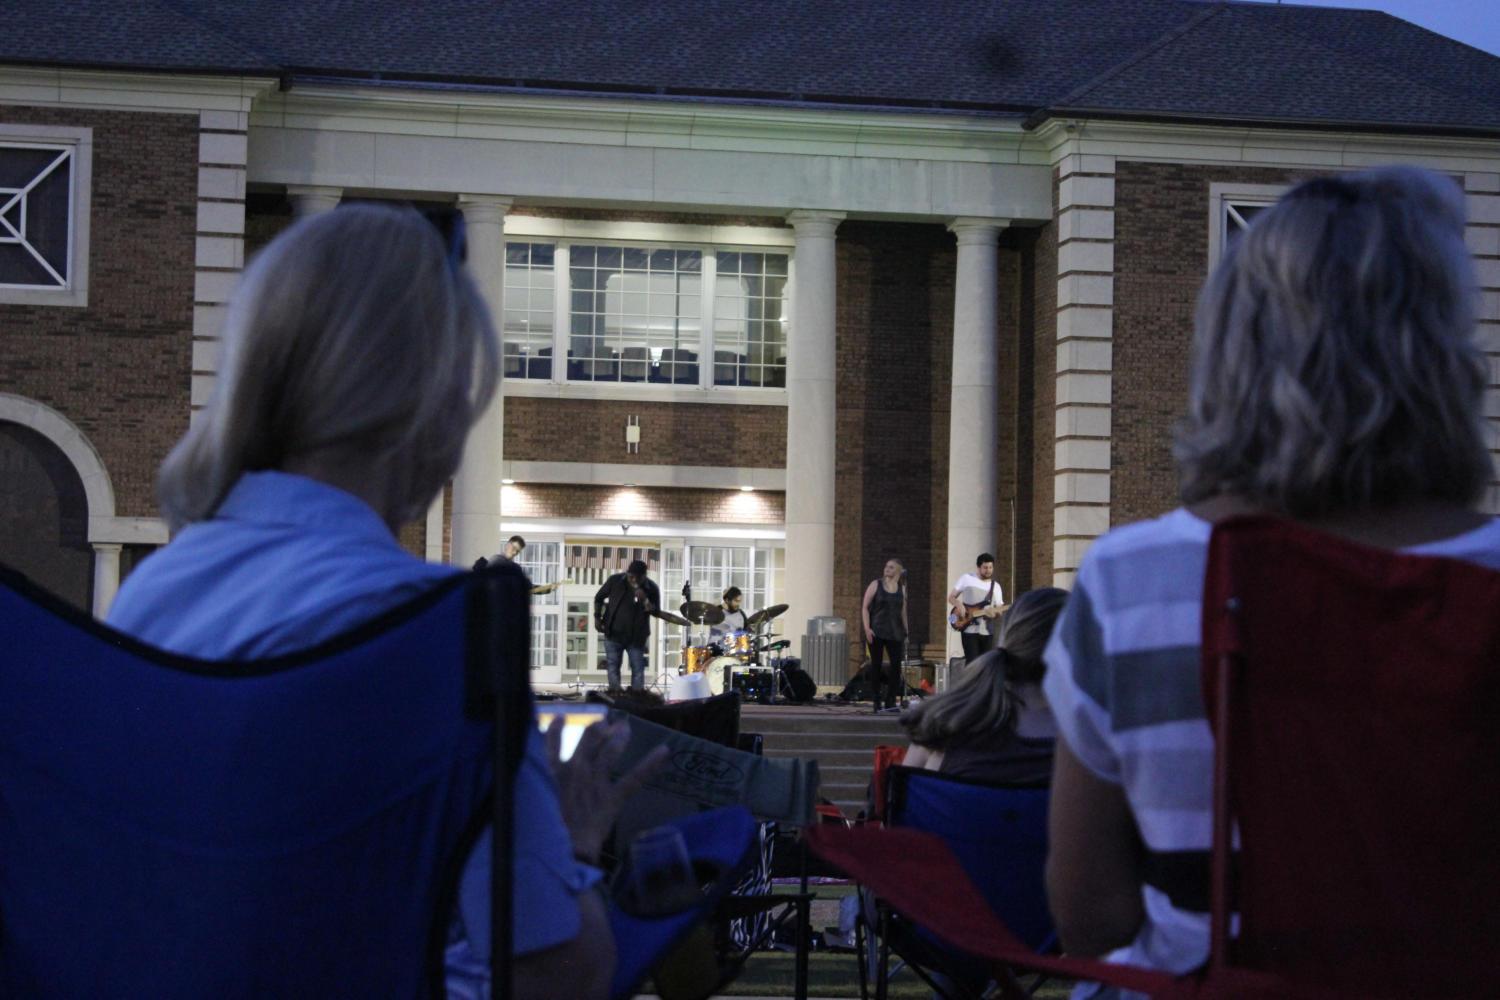 On saturday Sept. 16 at the Town Center Plaza, music was blasting for all friends and family to enjoy. At sundown, family and friends came together at Town Center to have fun and enjoy music from the band, The Enablers.